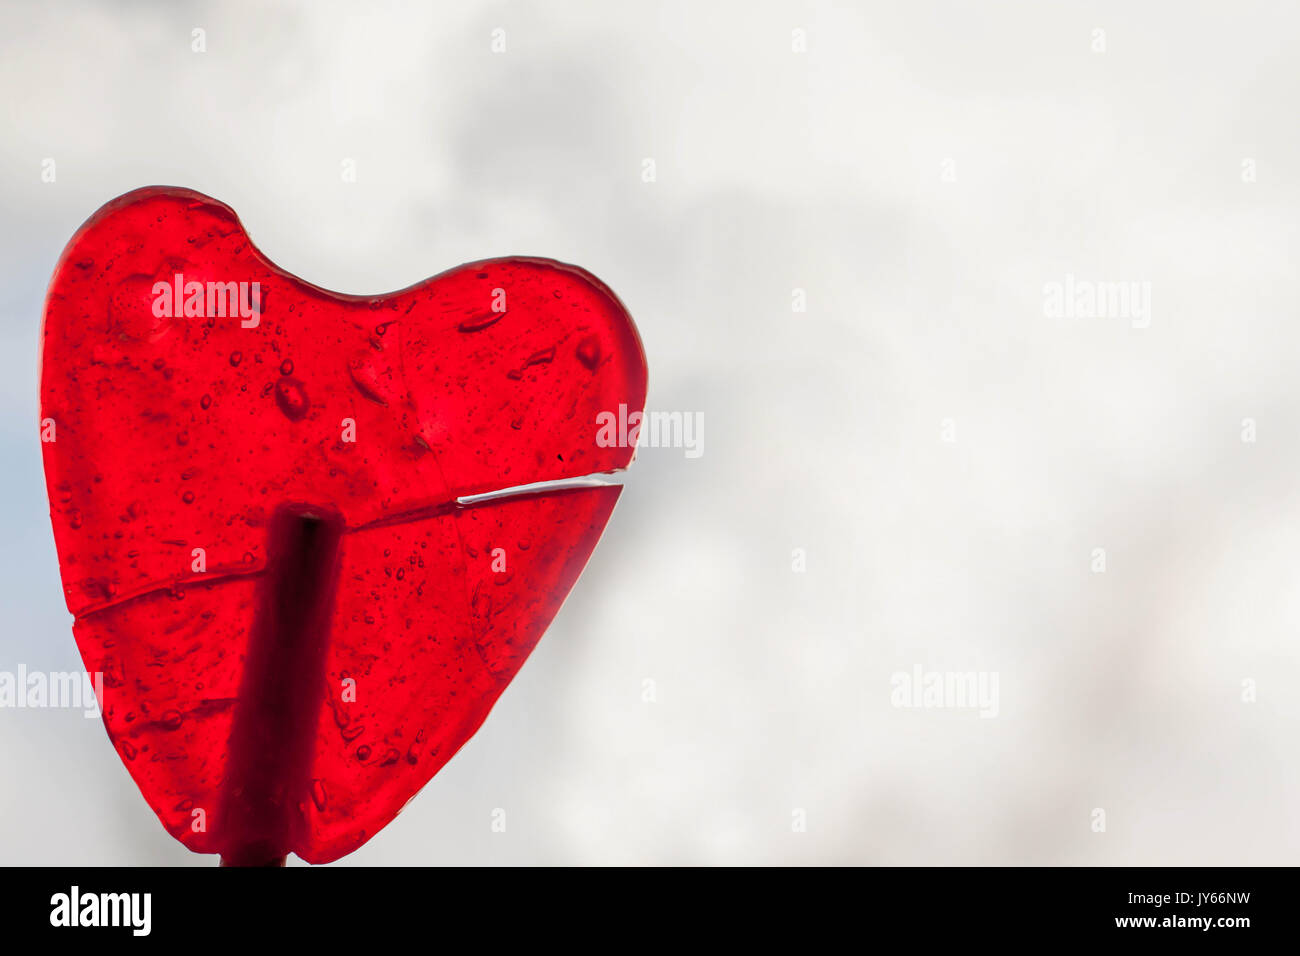 Sweet, transparent and red lollipop heart shape close up in abstract white background Stock Photo